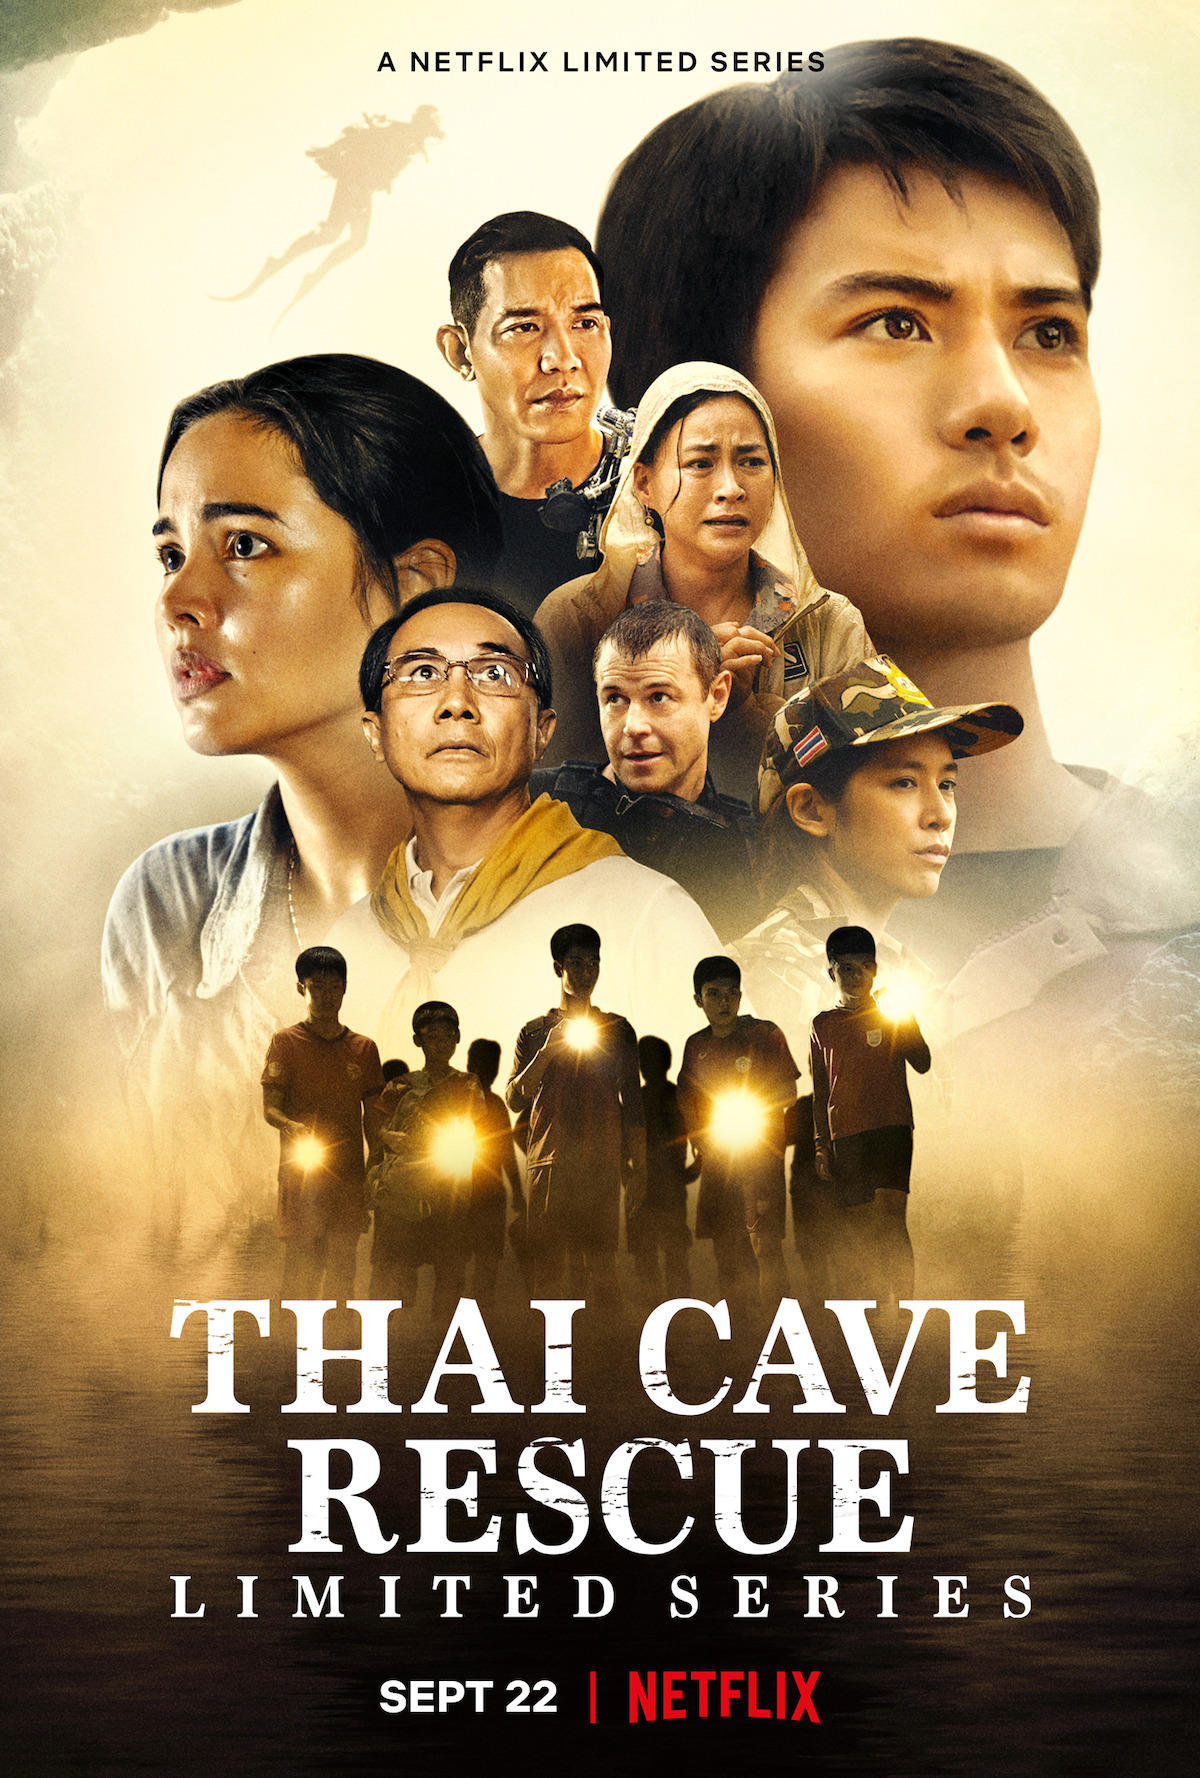 Watch Thai Cave Rescue Trailer Release Date News photo